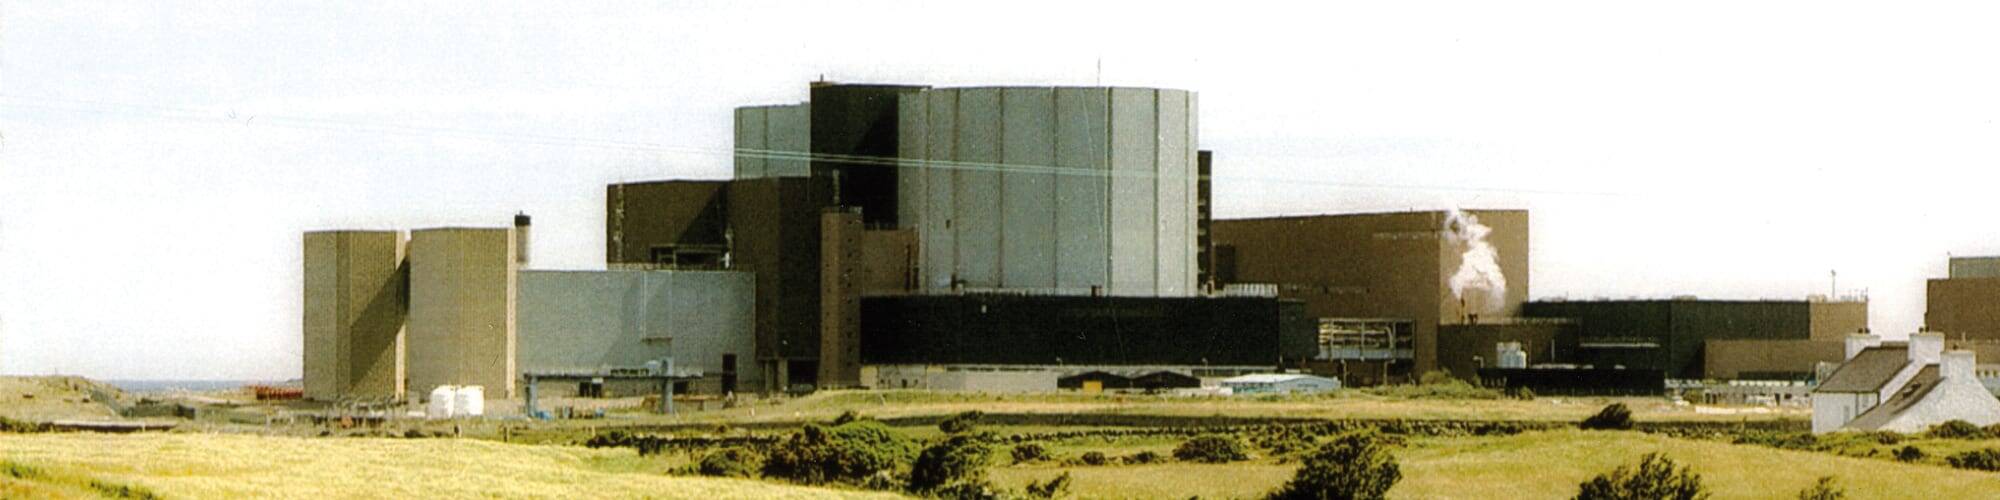 Horizon cleared to purchase Wylfa Newydd reactor components